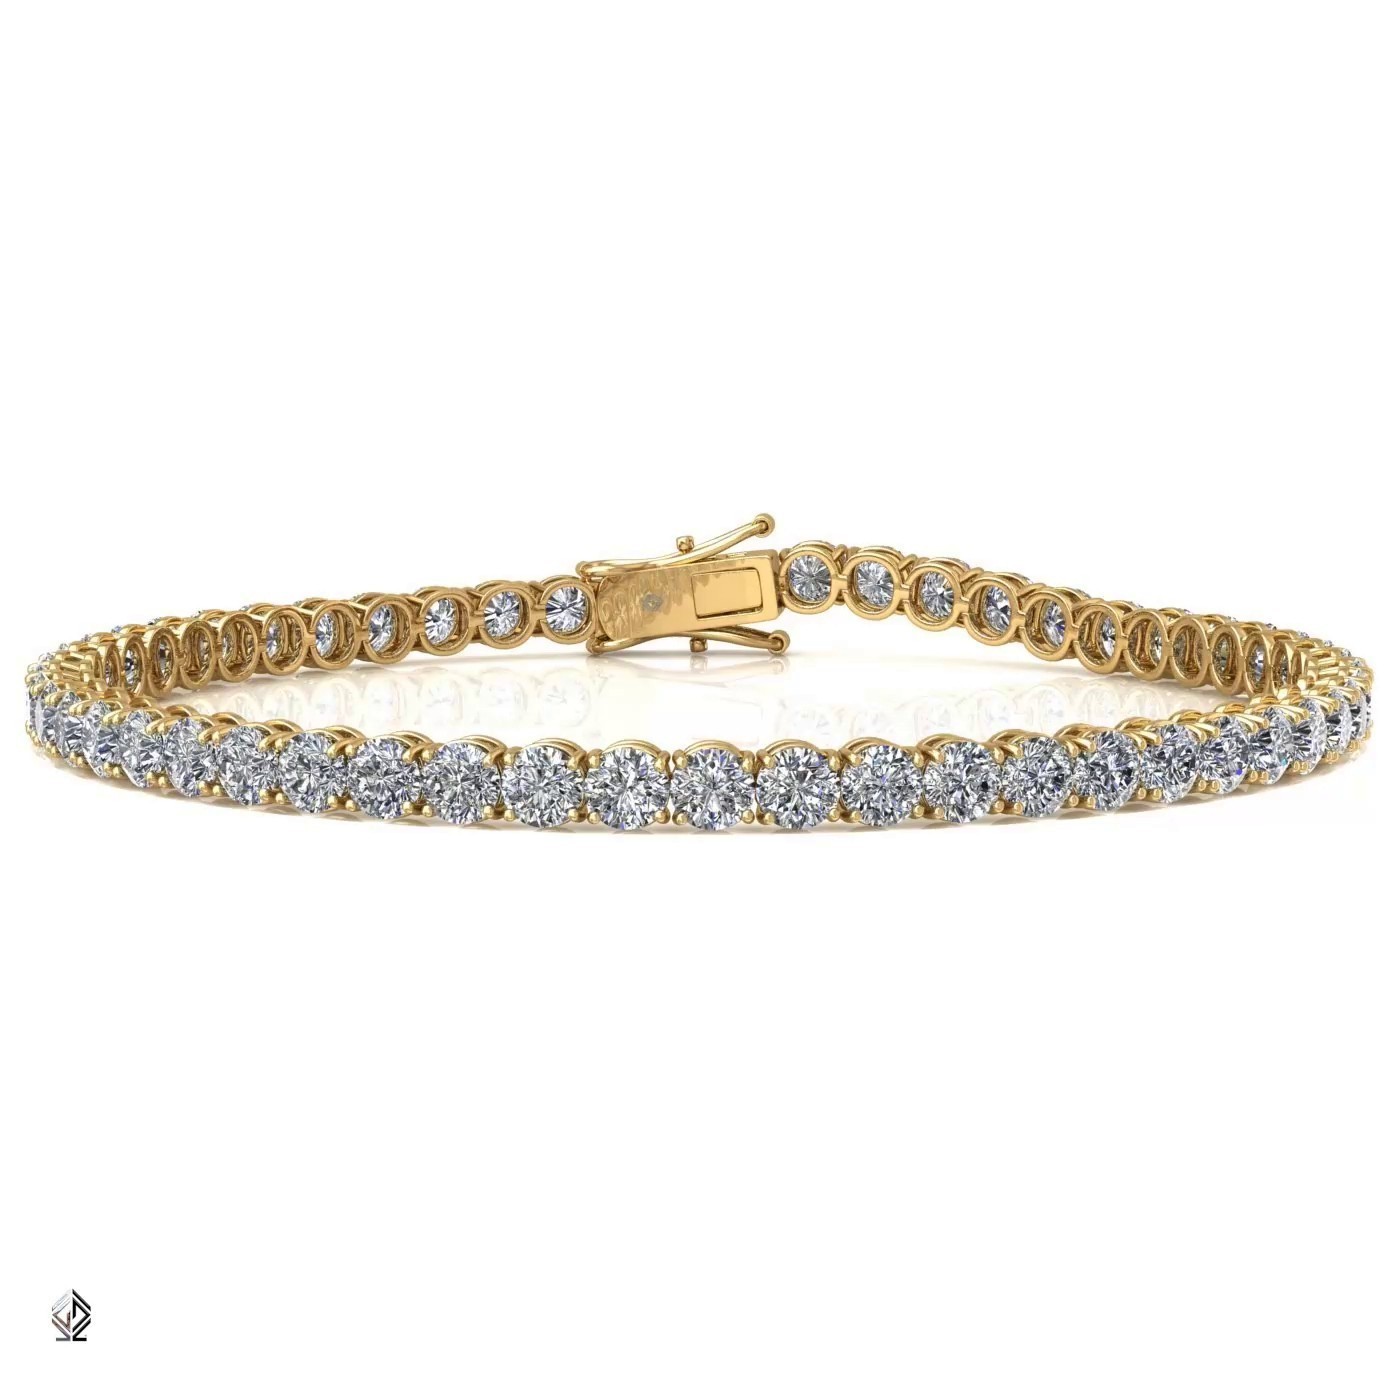 18k yellow gold 2.8mm 4 prong round shape diamond tennis bracelet in round setting Photos & images